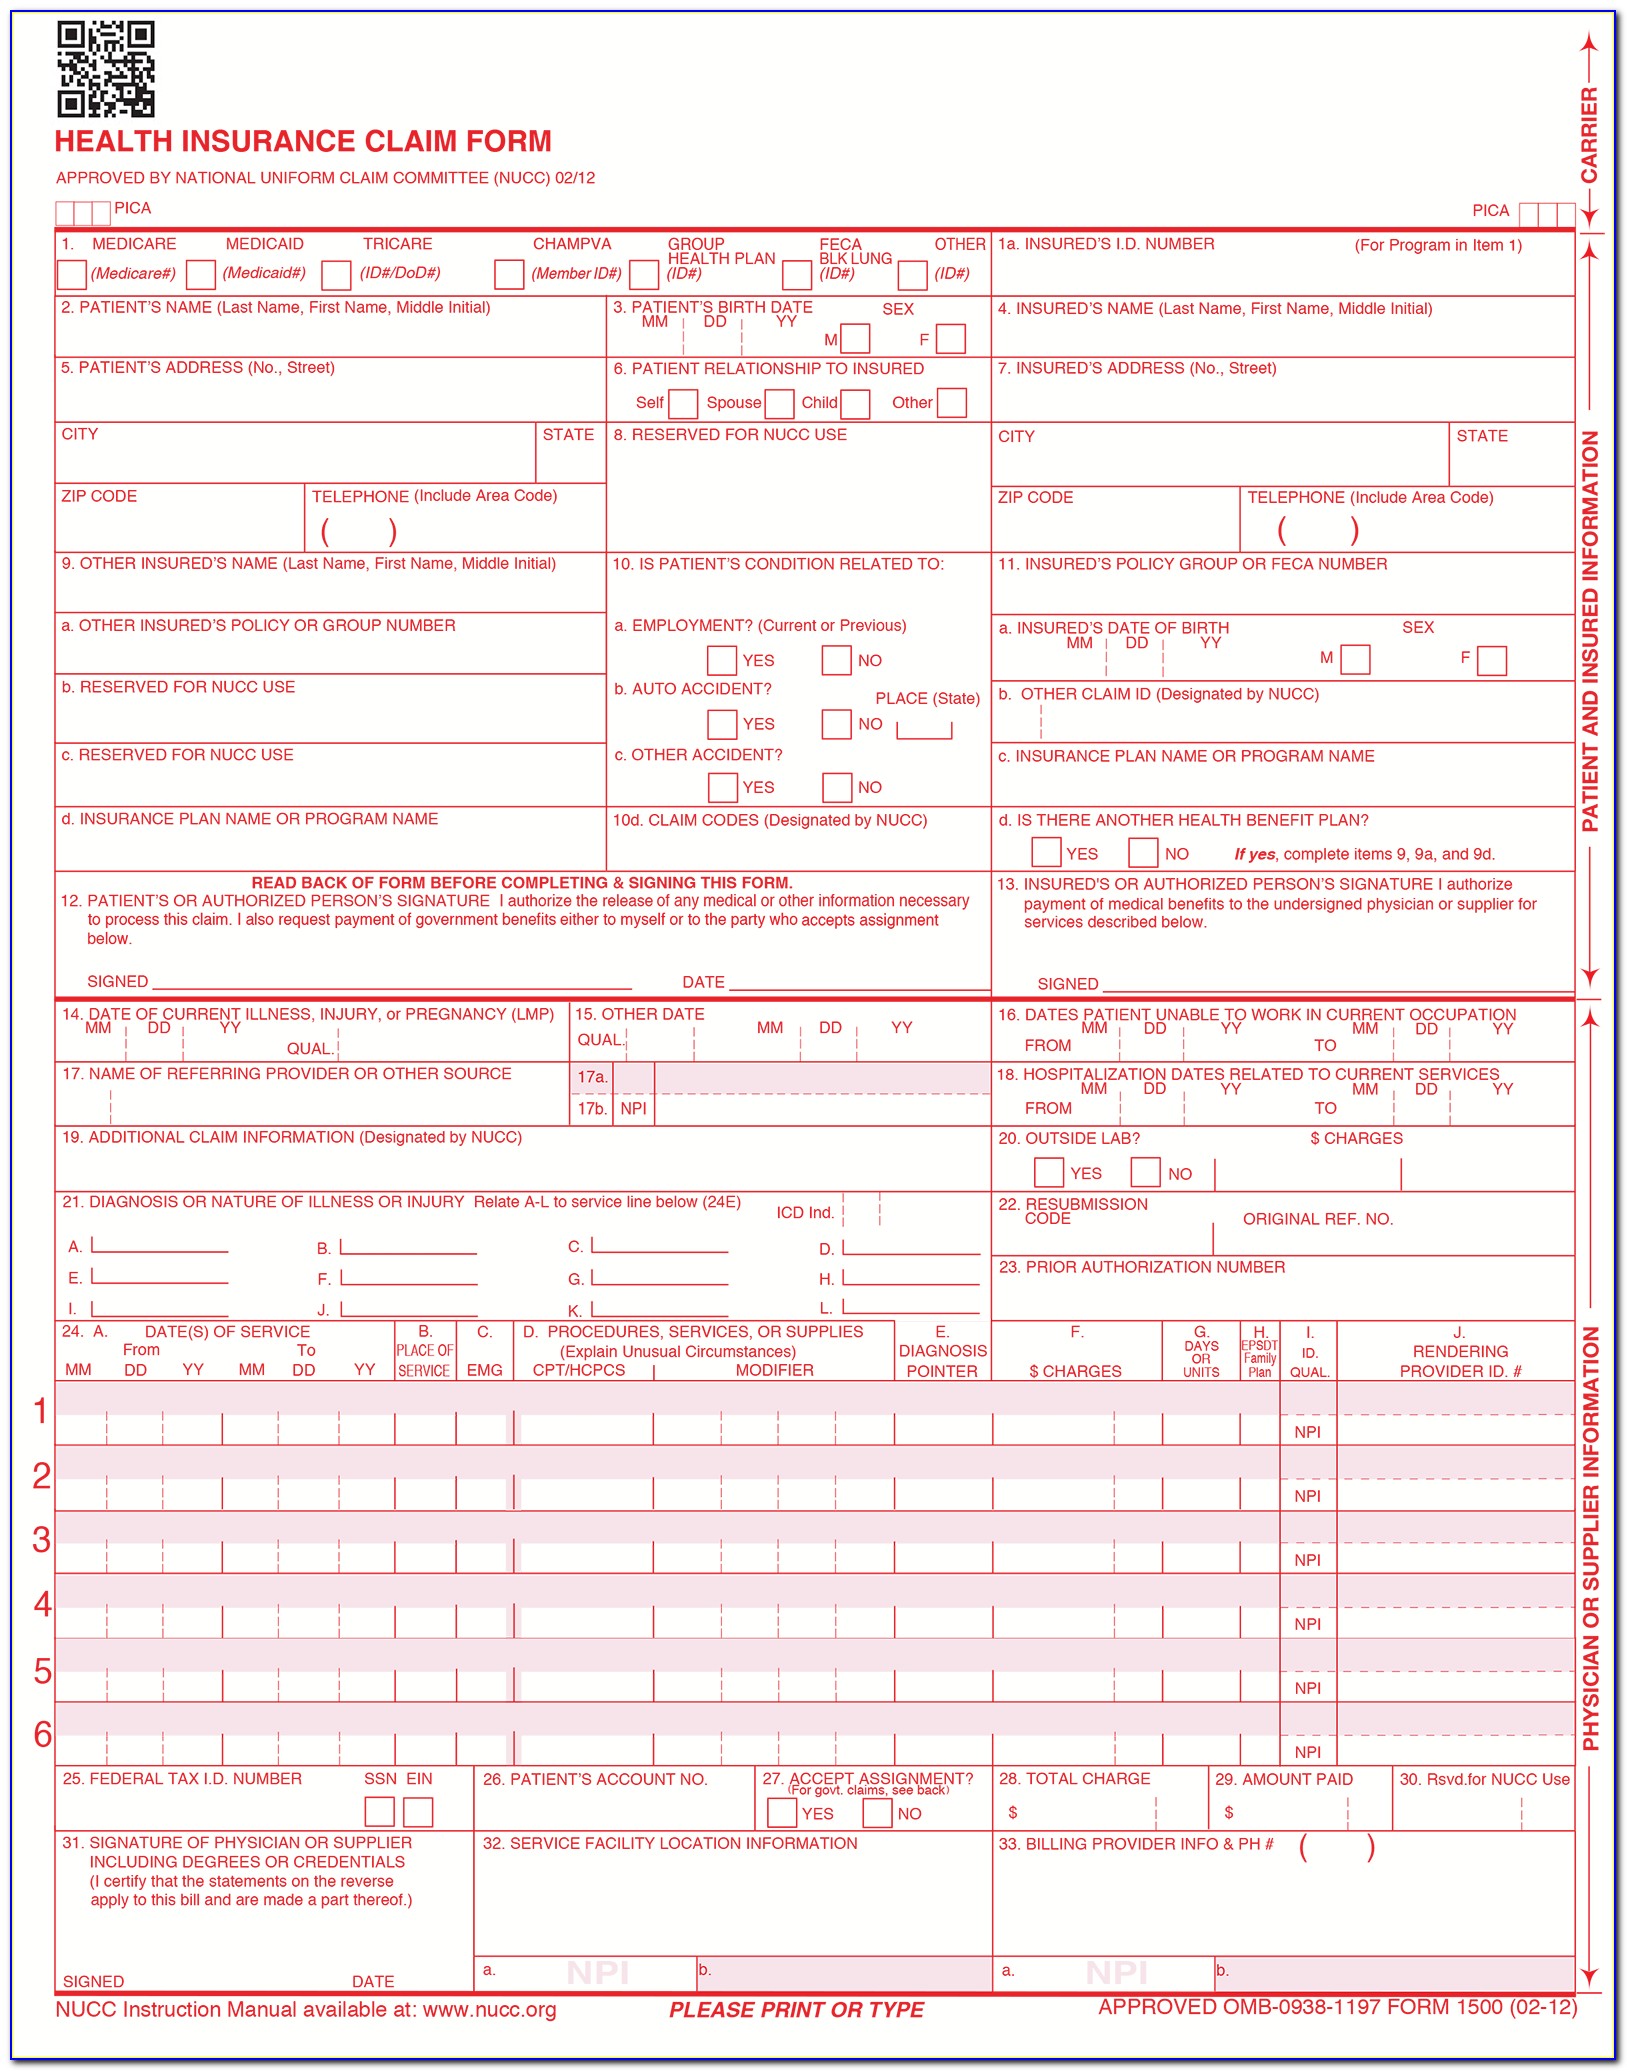 Sample Cms 1500 Form Completed